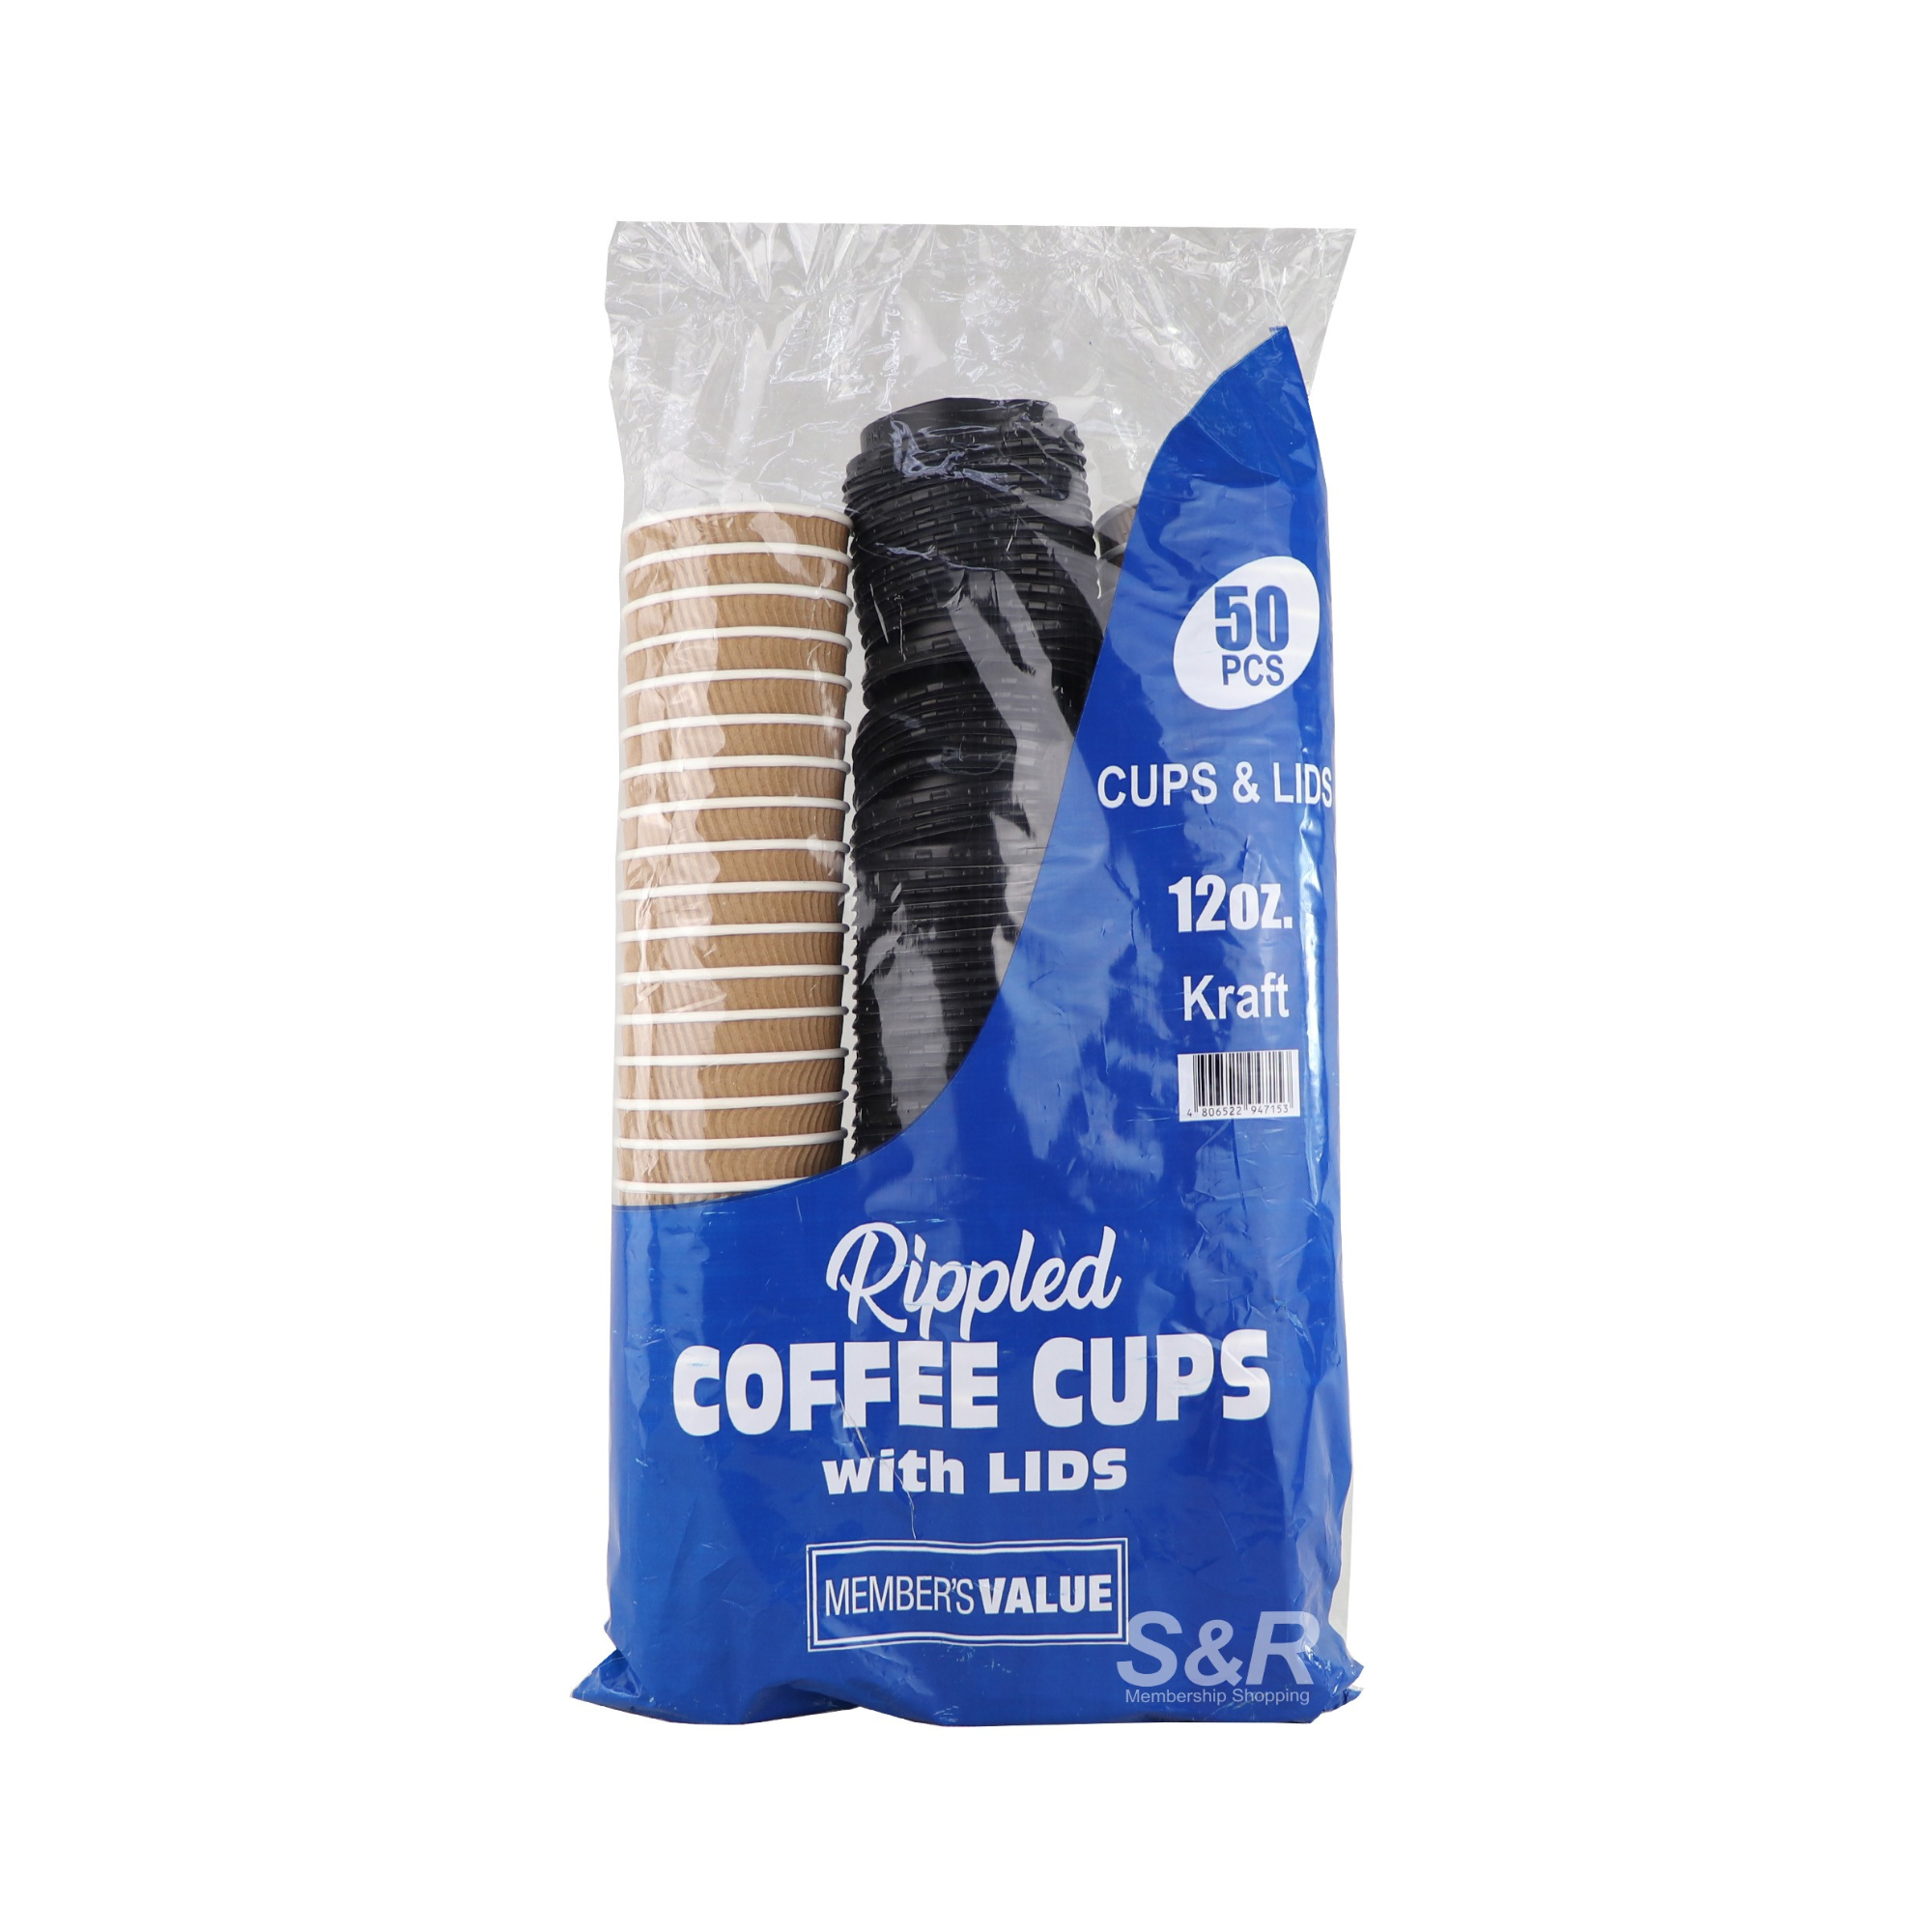 Member's Value 12oz Rippled Coffee Cups 50pcs